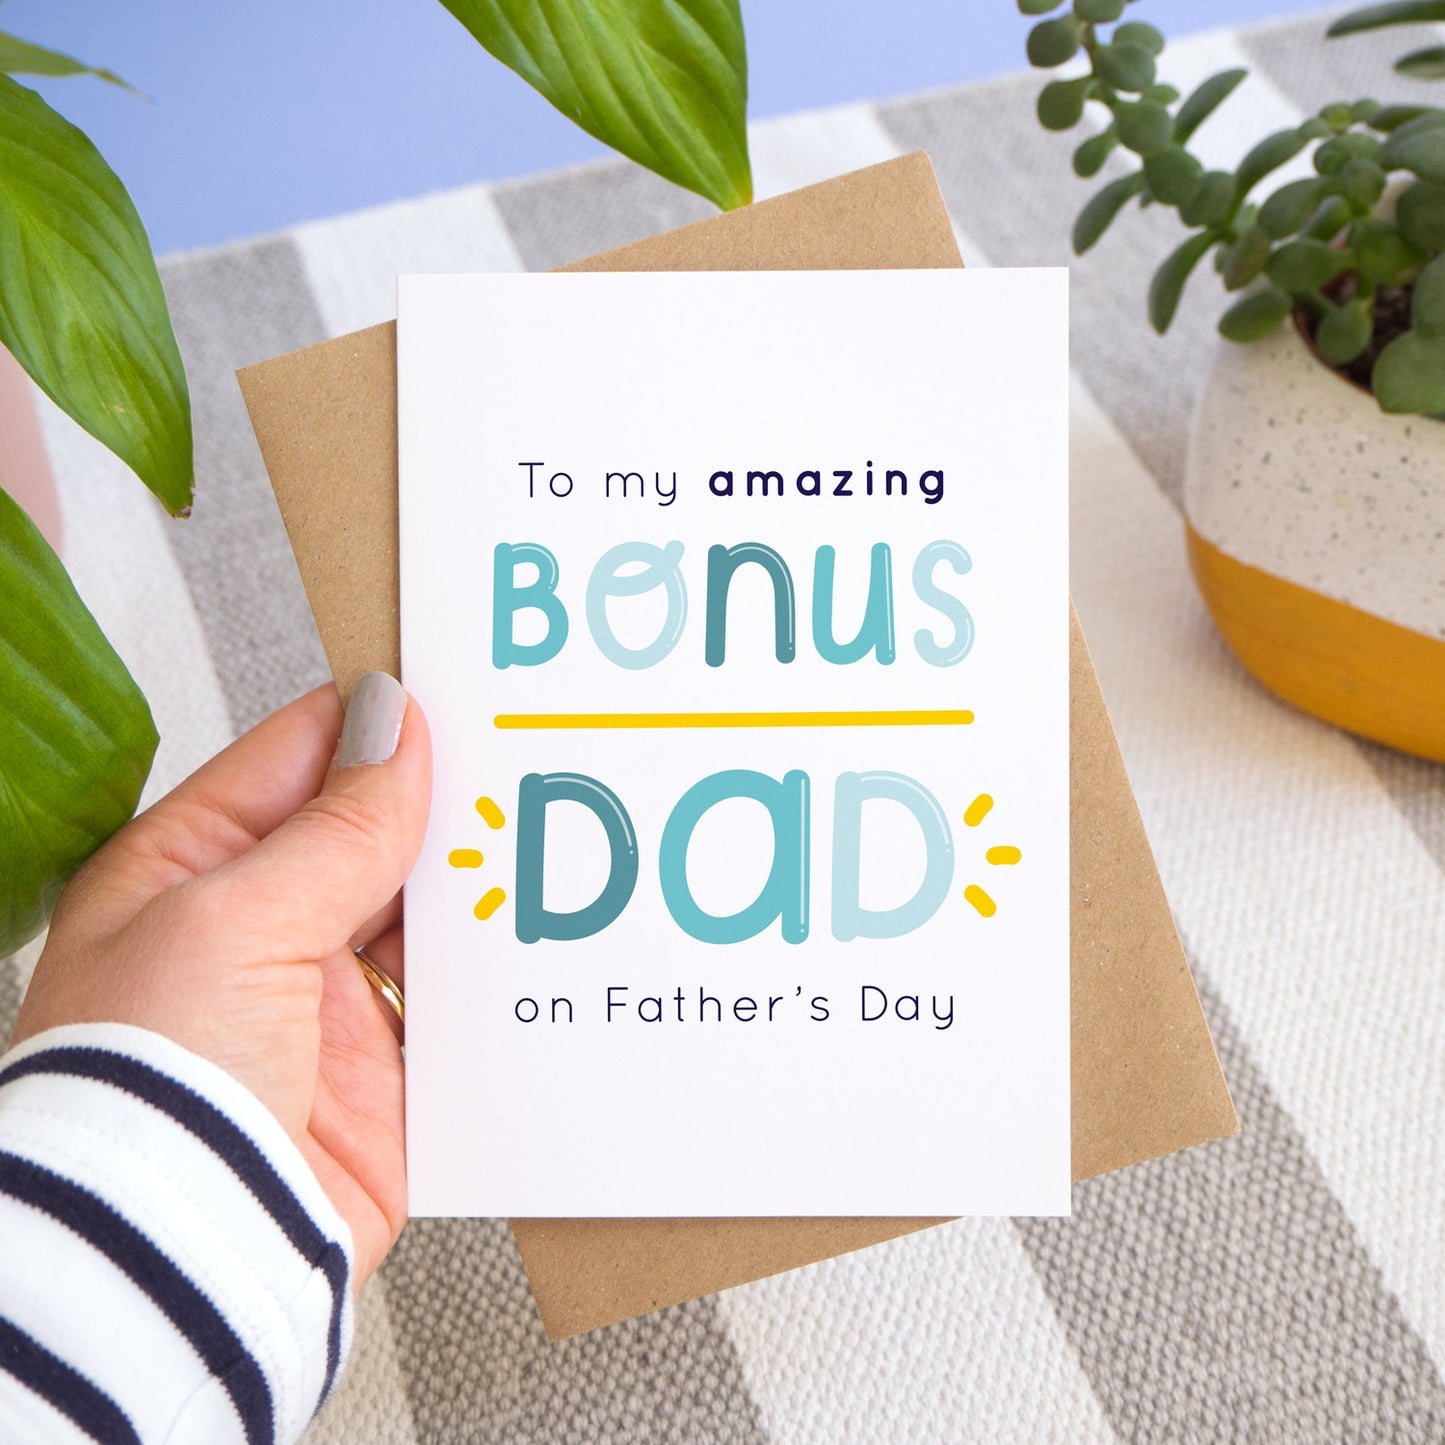 The bonus dad Father's day card and kraft brown envelope are held over a stripy rug with a blue background and potted plants. The card feature navy and varying tones of blue writing and a yellow underline and flicks.